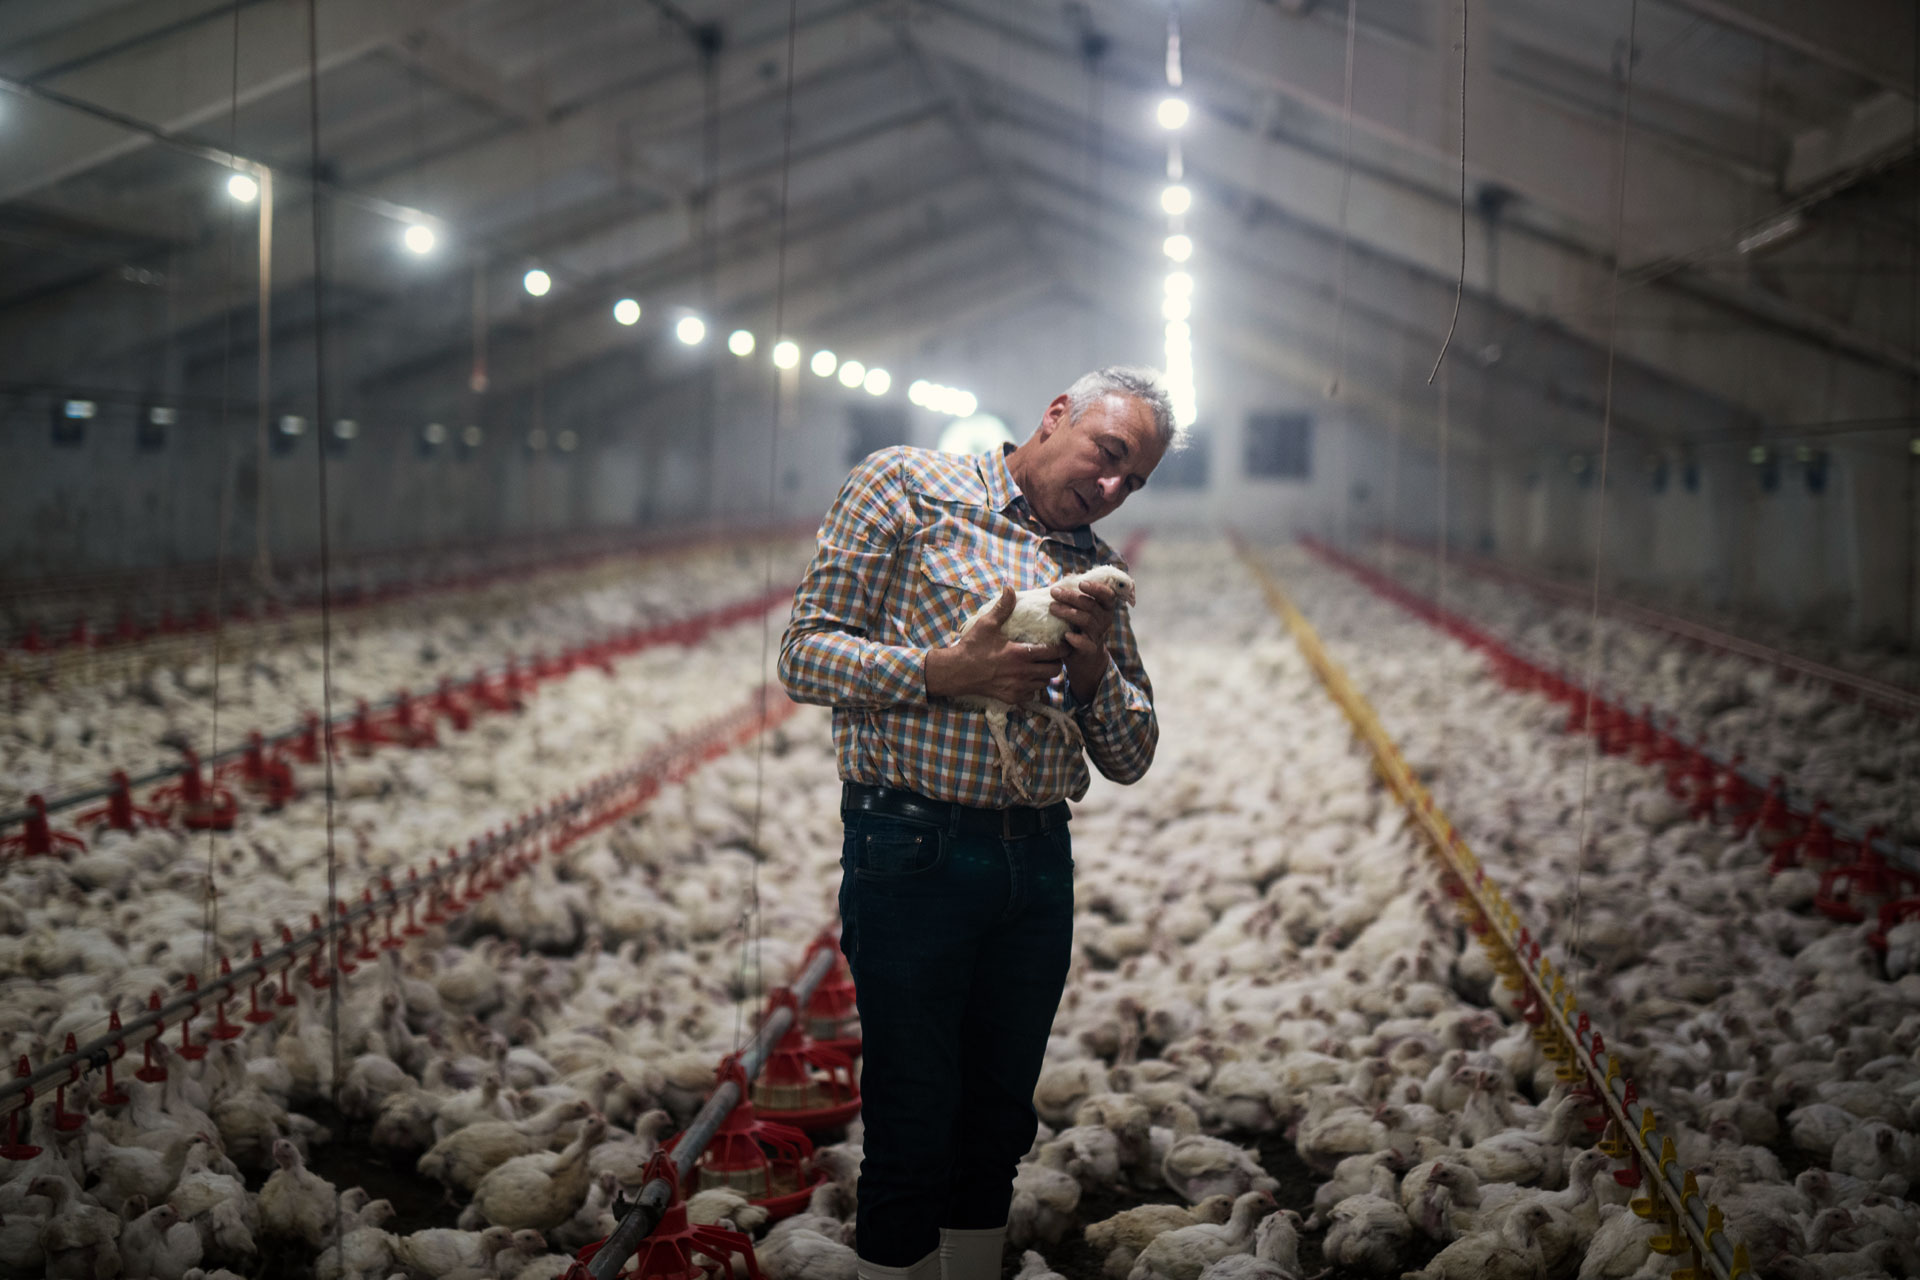 man holding a chicken in an industrial plant surrounded by other chickens